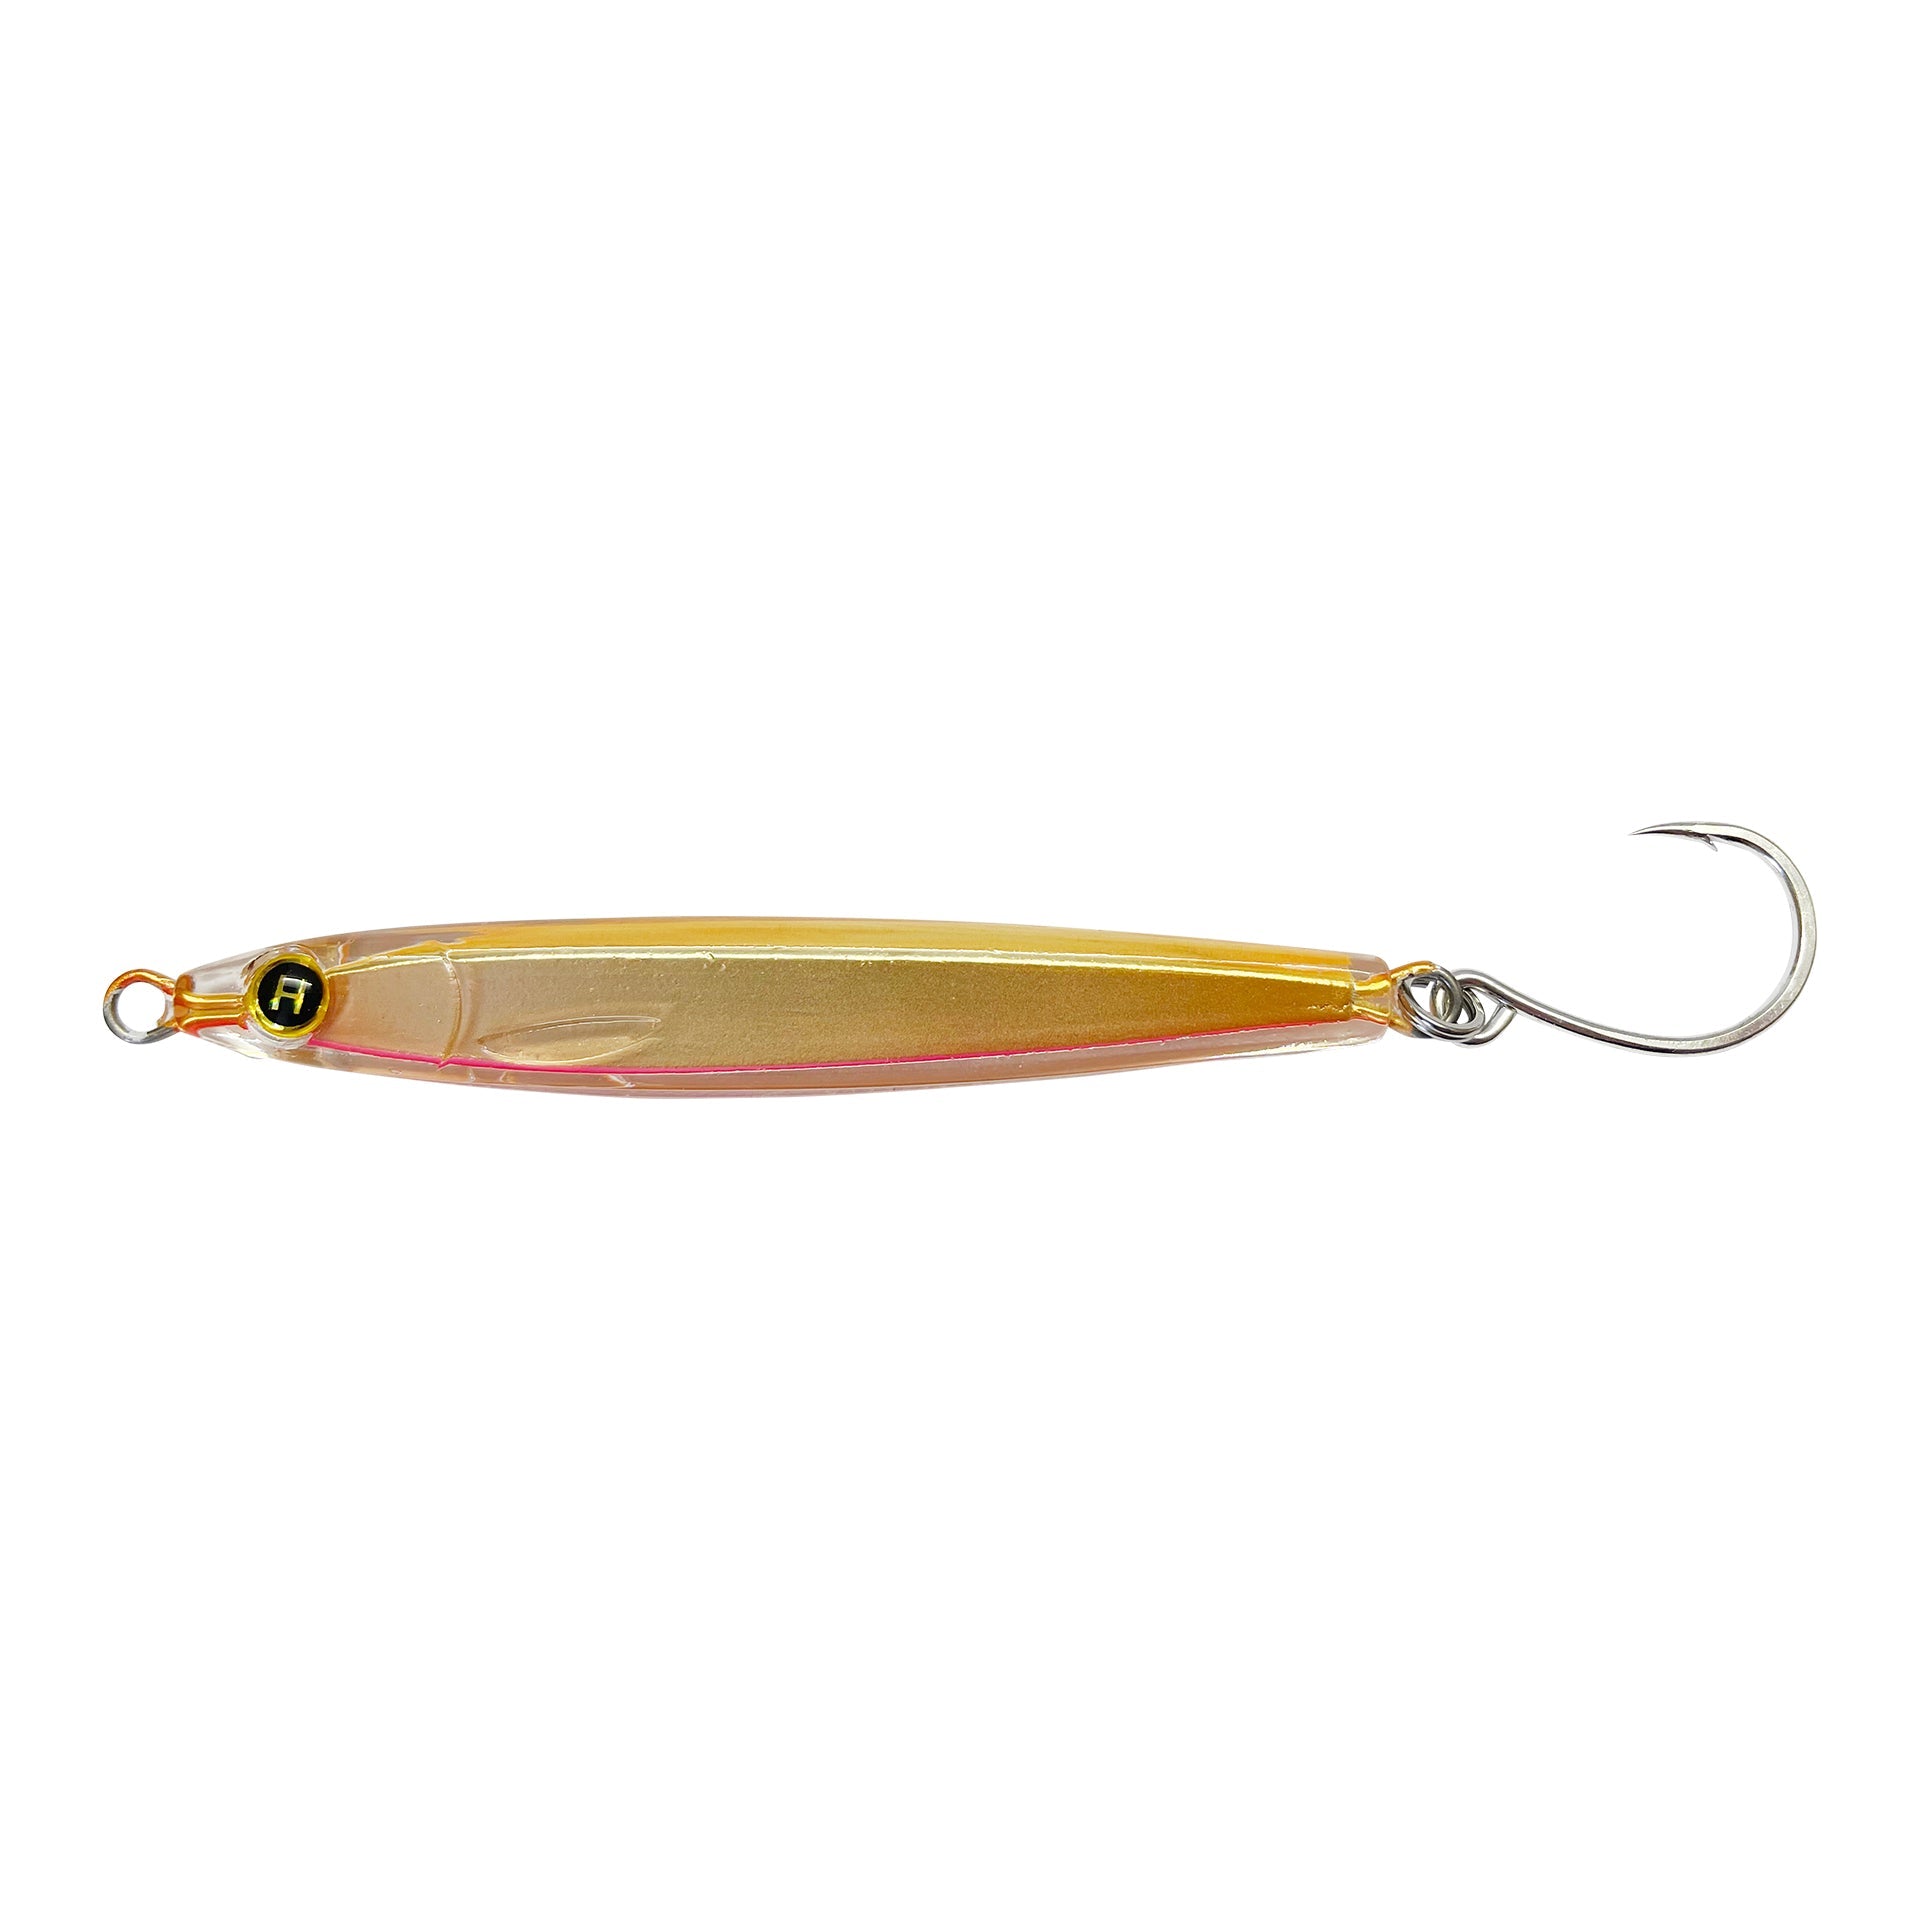 Saltys Epoxy Top Coats for Fishing Lures